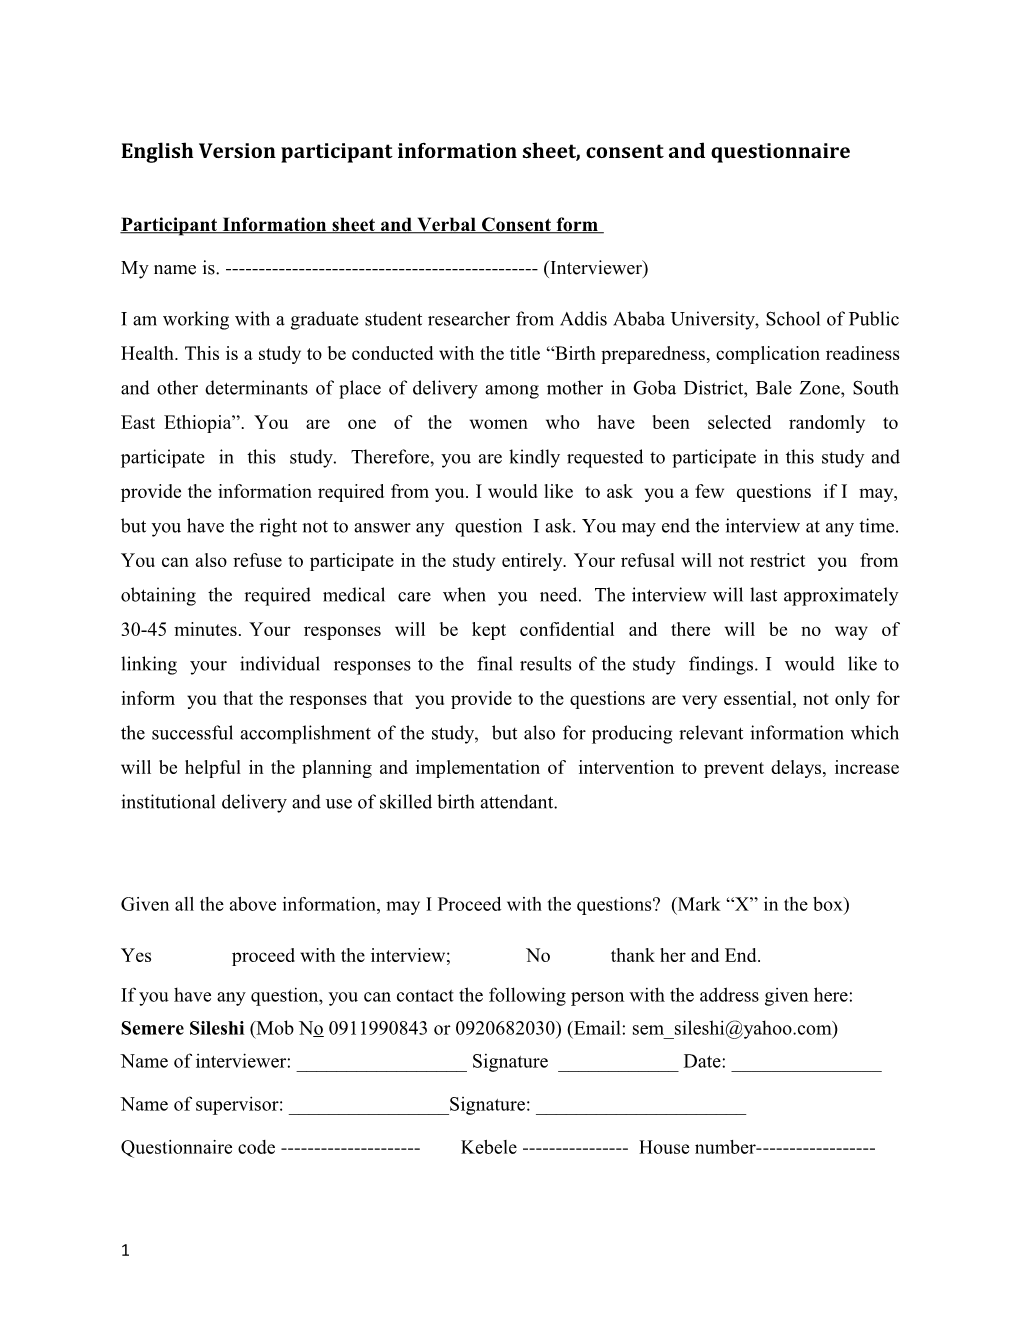 English Version Participant Information Sheet, Consent and Questionnaire